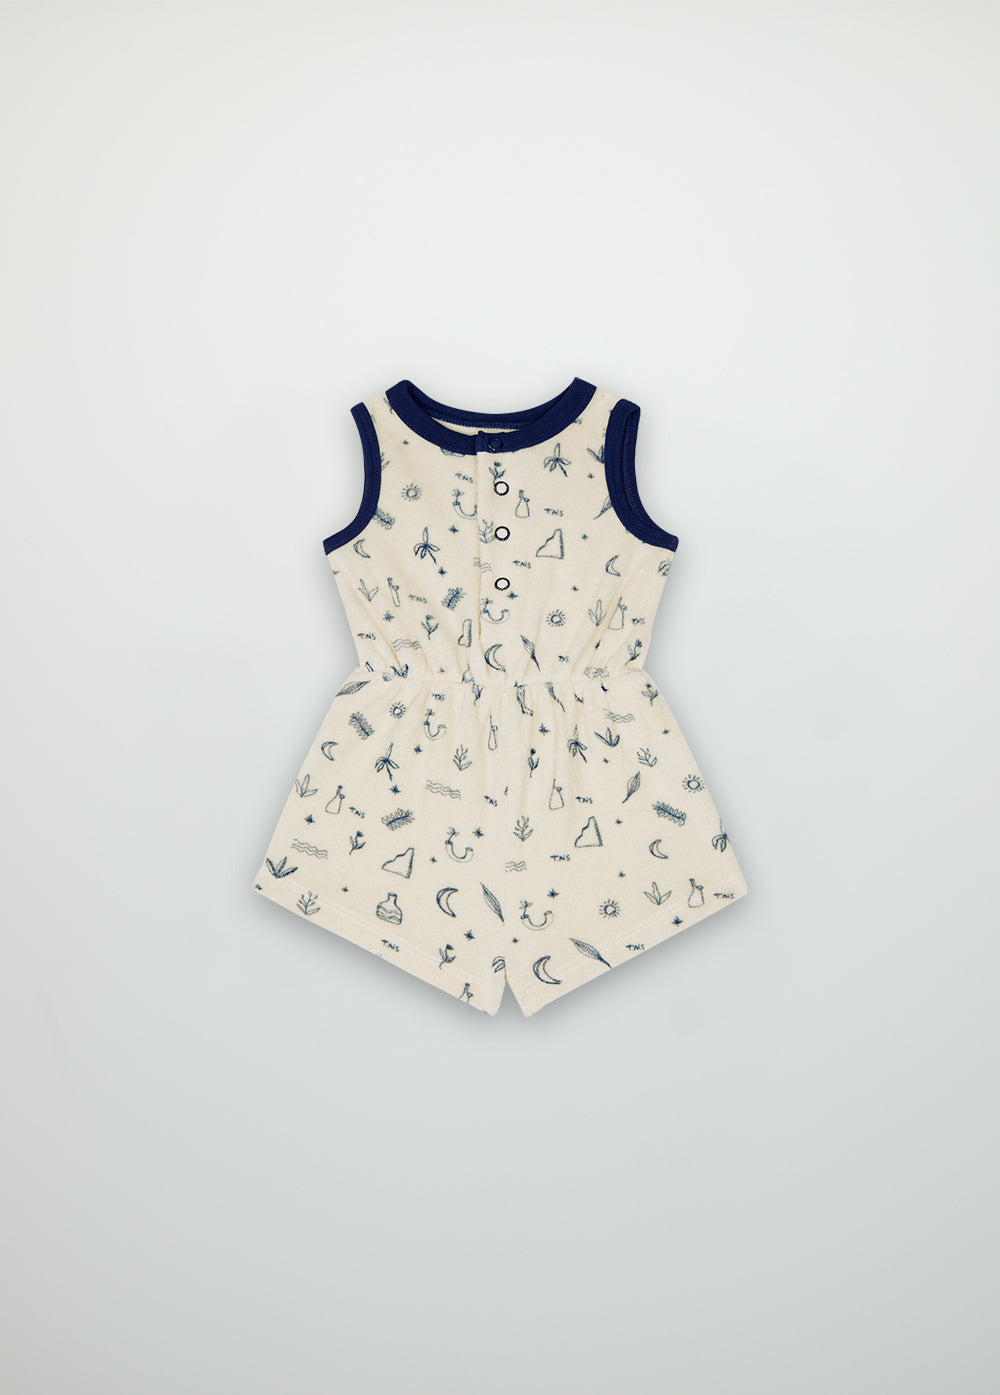 Francis Baby Romper All the things print